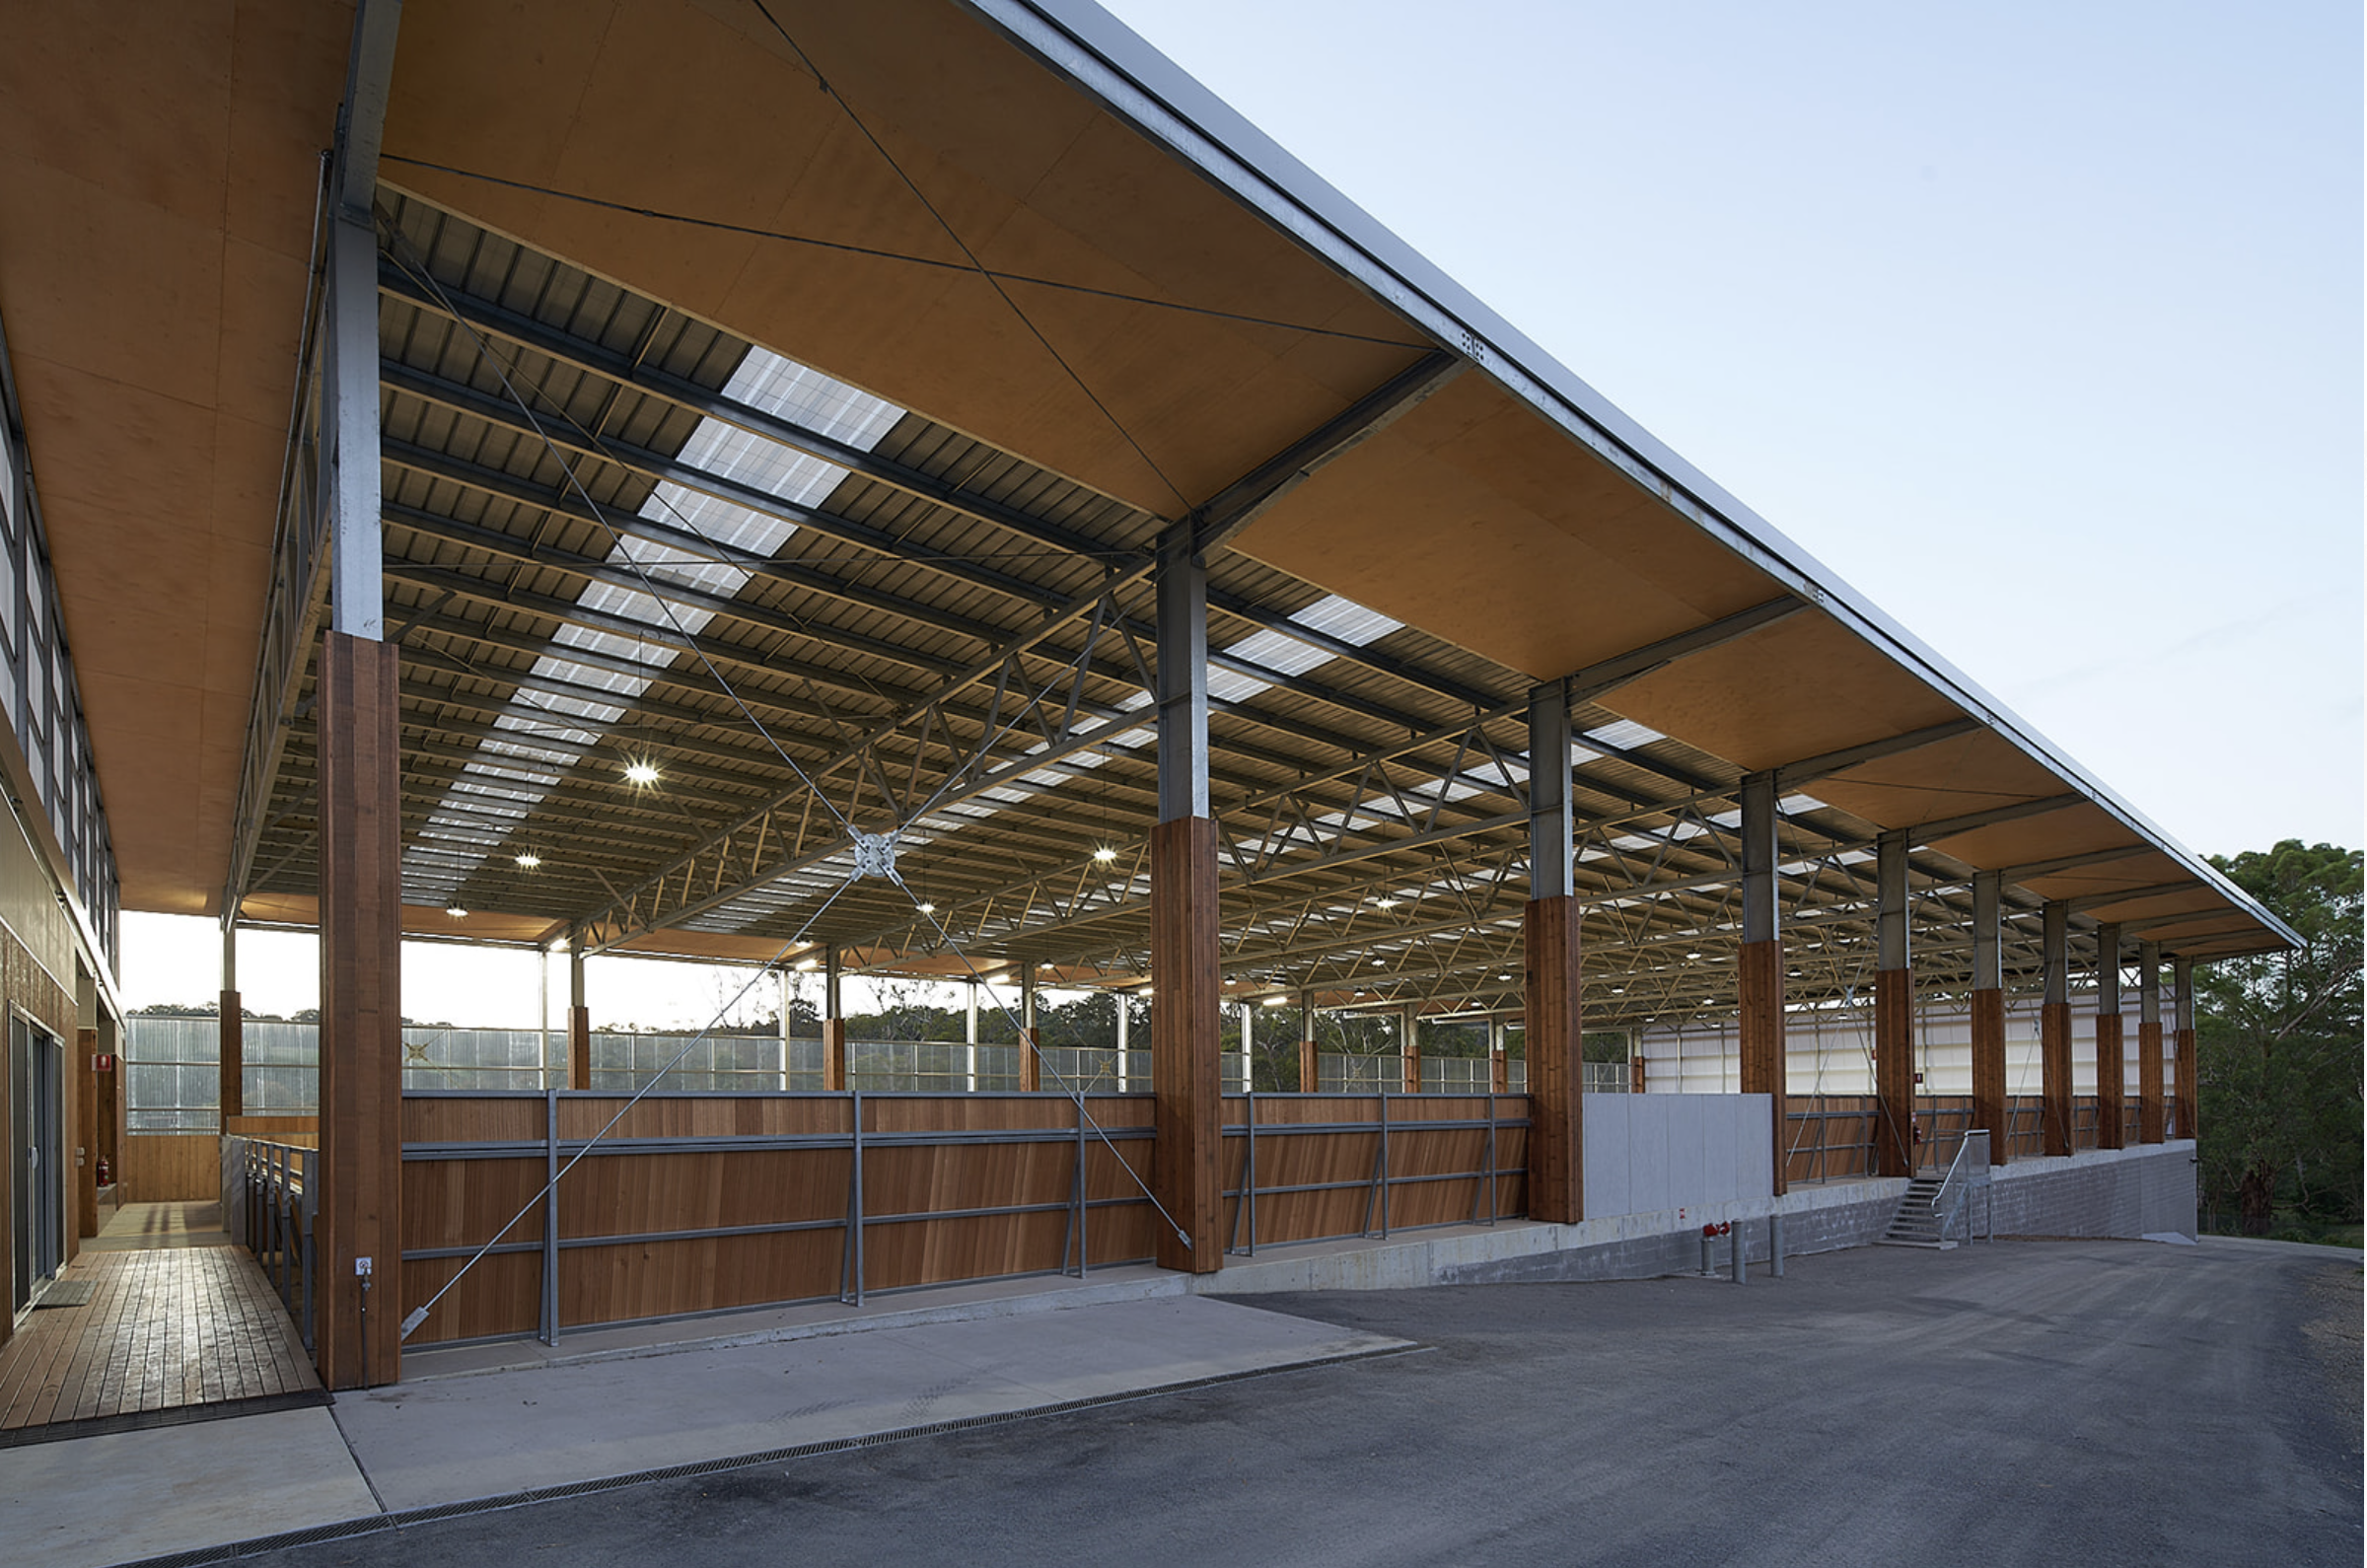 a view of the covered stable arena's lobby, presenting an inviting entrance area that serves as a hub for equestrian activities.